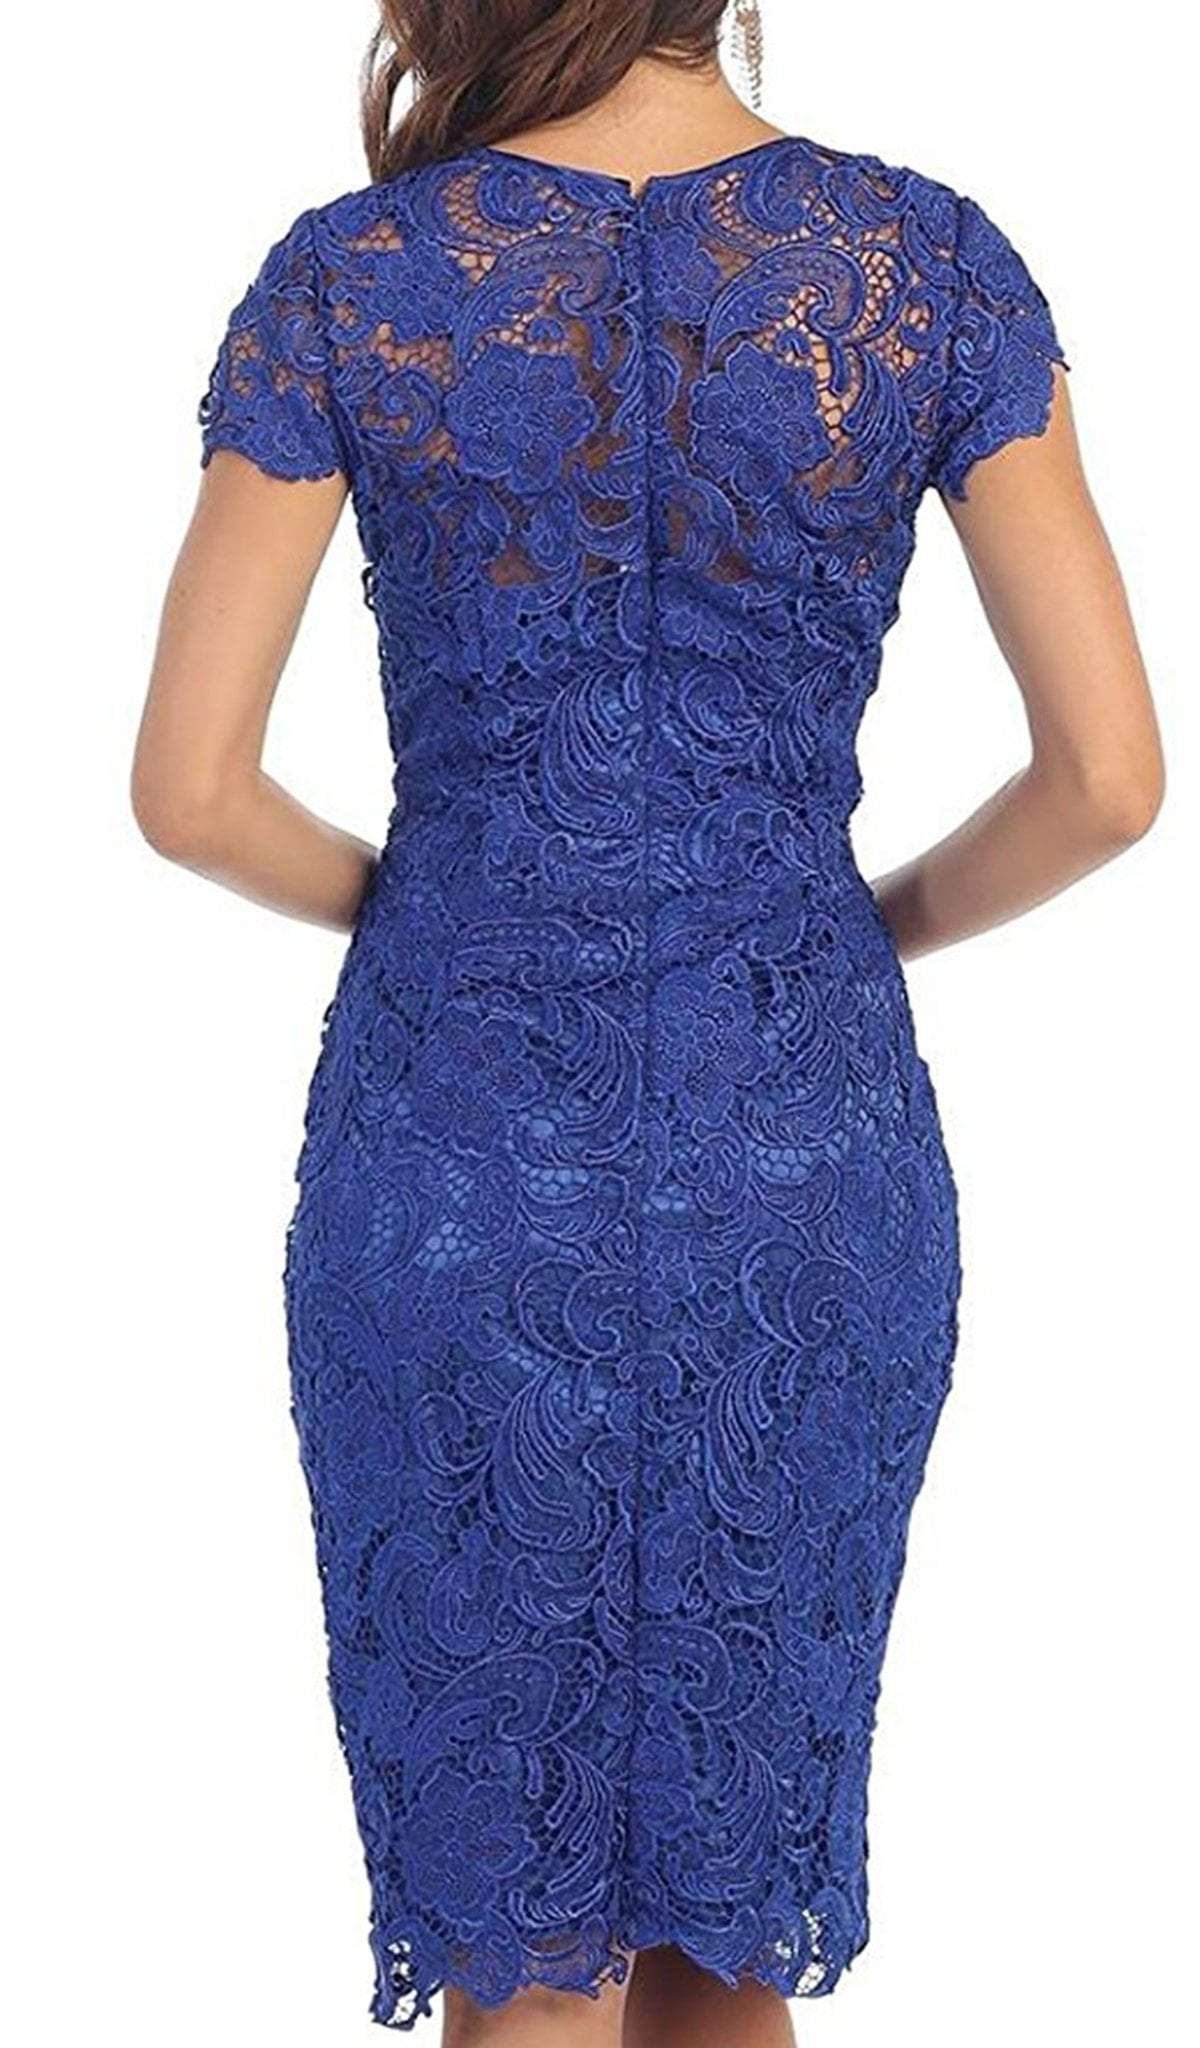 May Queen - Jewel Short Sleeves Scalloped Lace Cocktail Dress In Blue